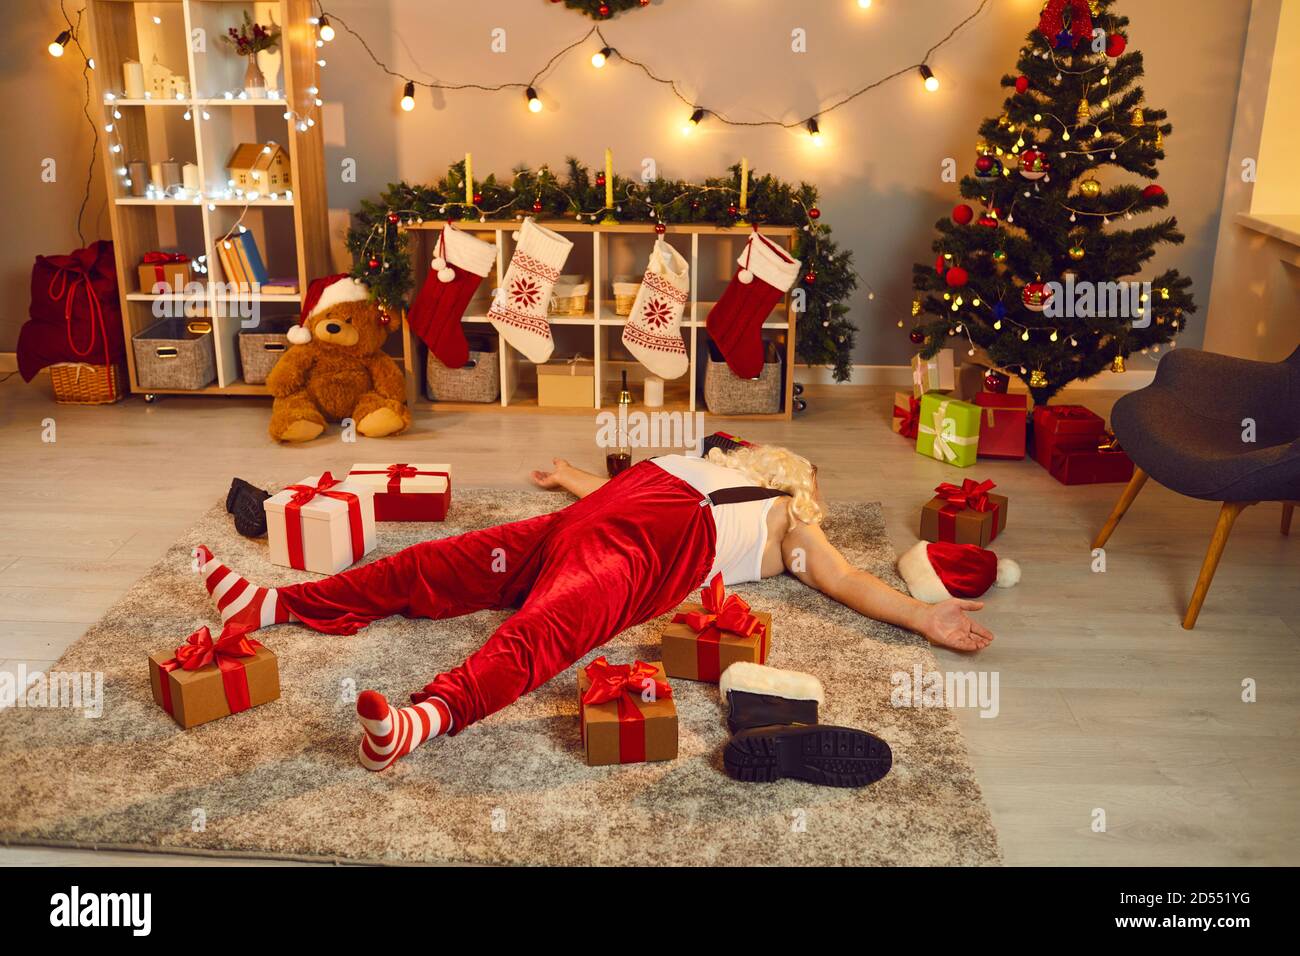 Drunk or overworked Santa sleeping on floor after night of Christmas parties and delivering presents Stock Photo